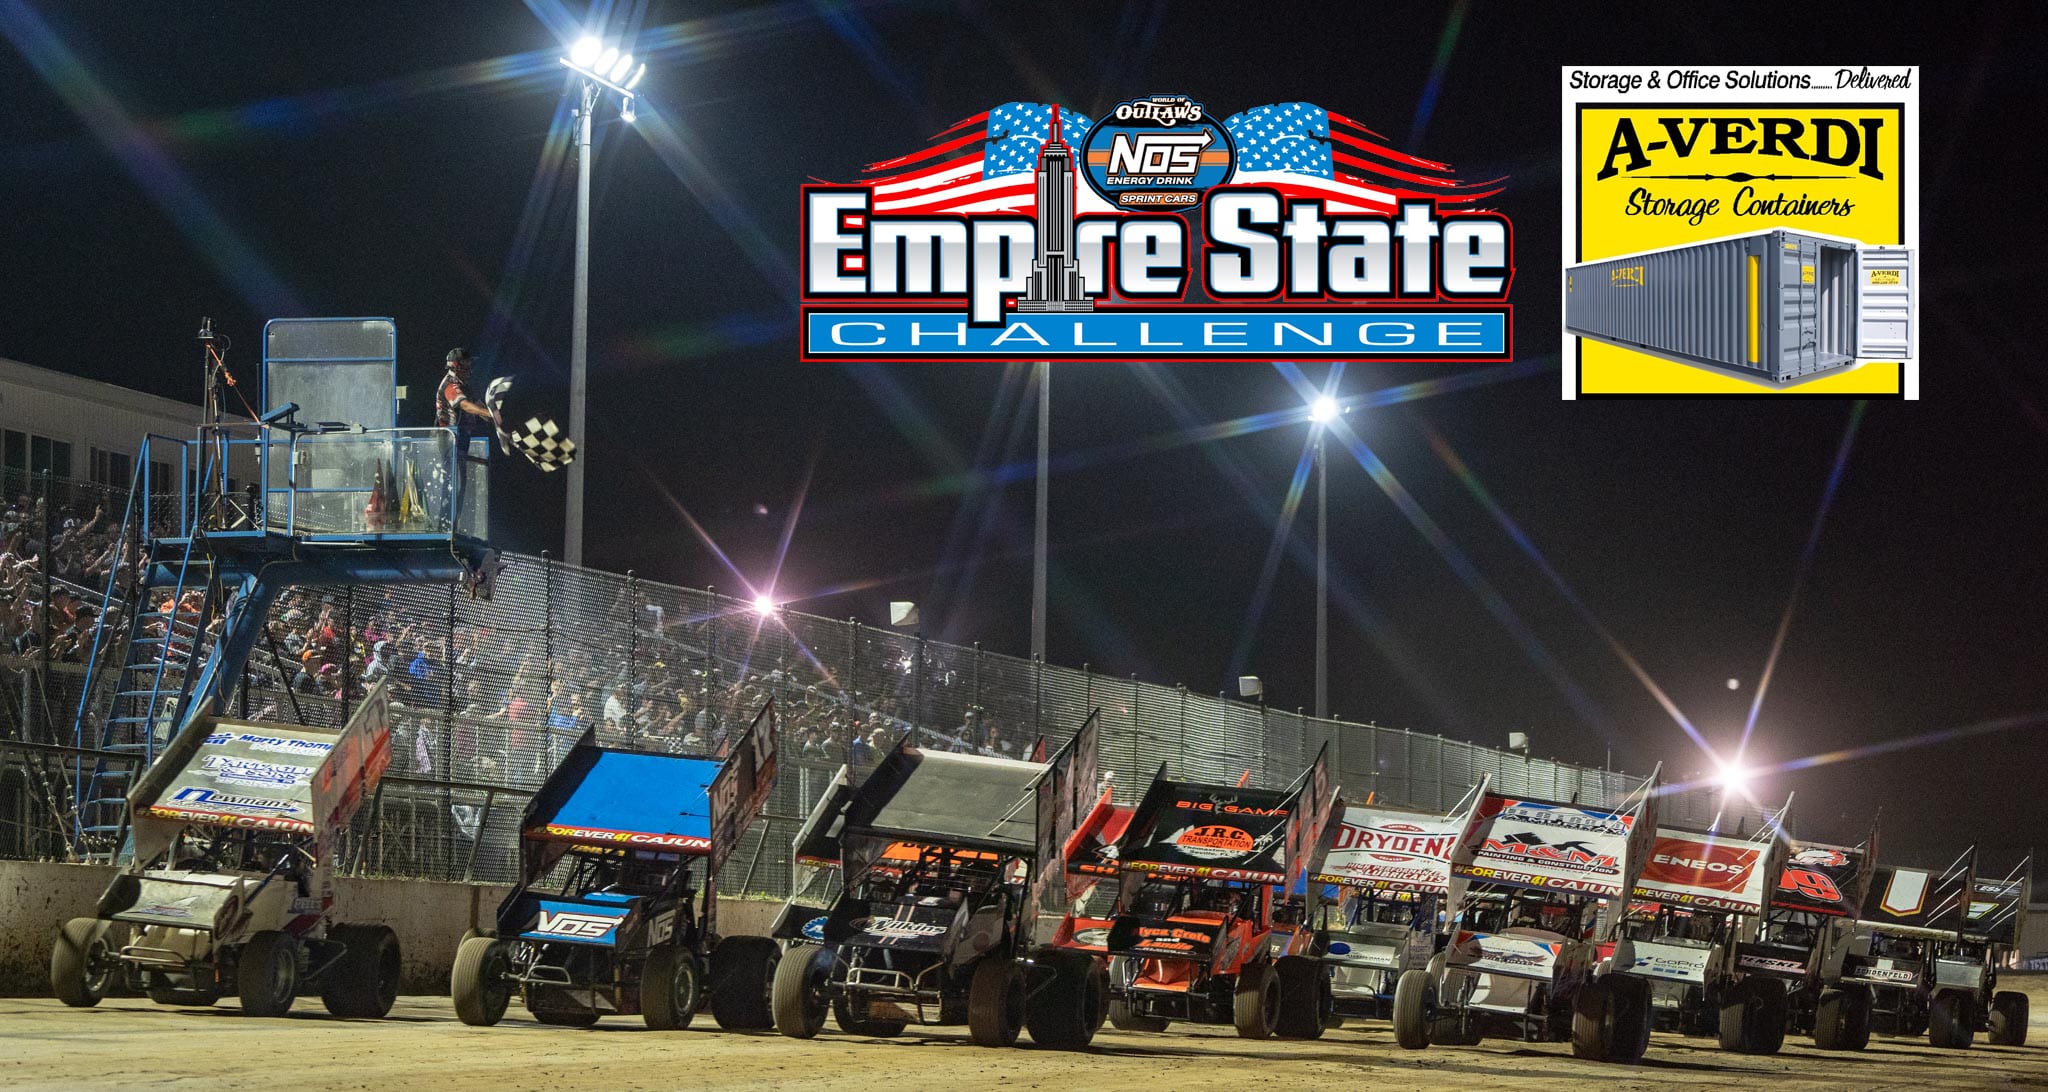 A-Verdi Storage Containers will back the World of Outlaws NOS Energy Drink Sprint Car Series event at Weedsport Speedway.